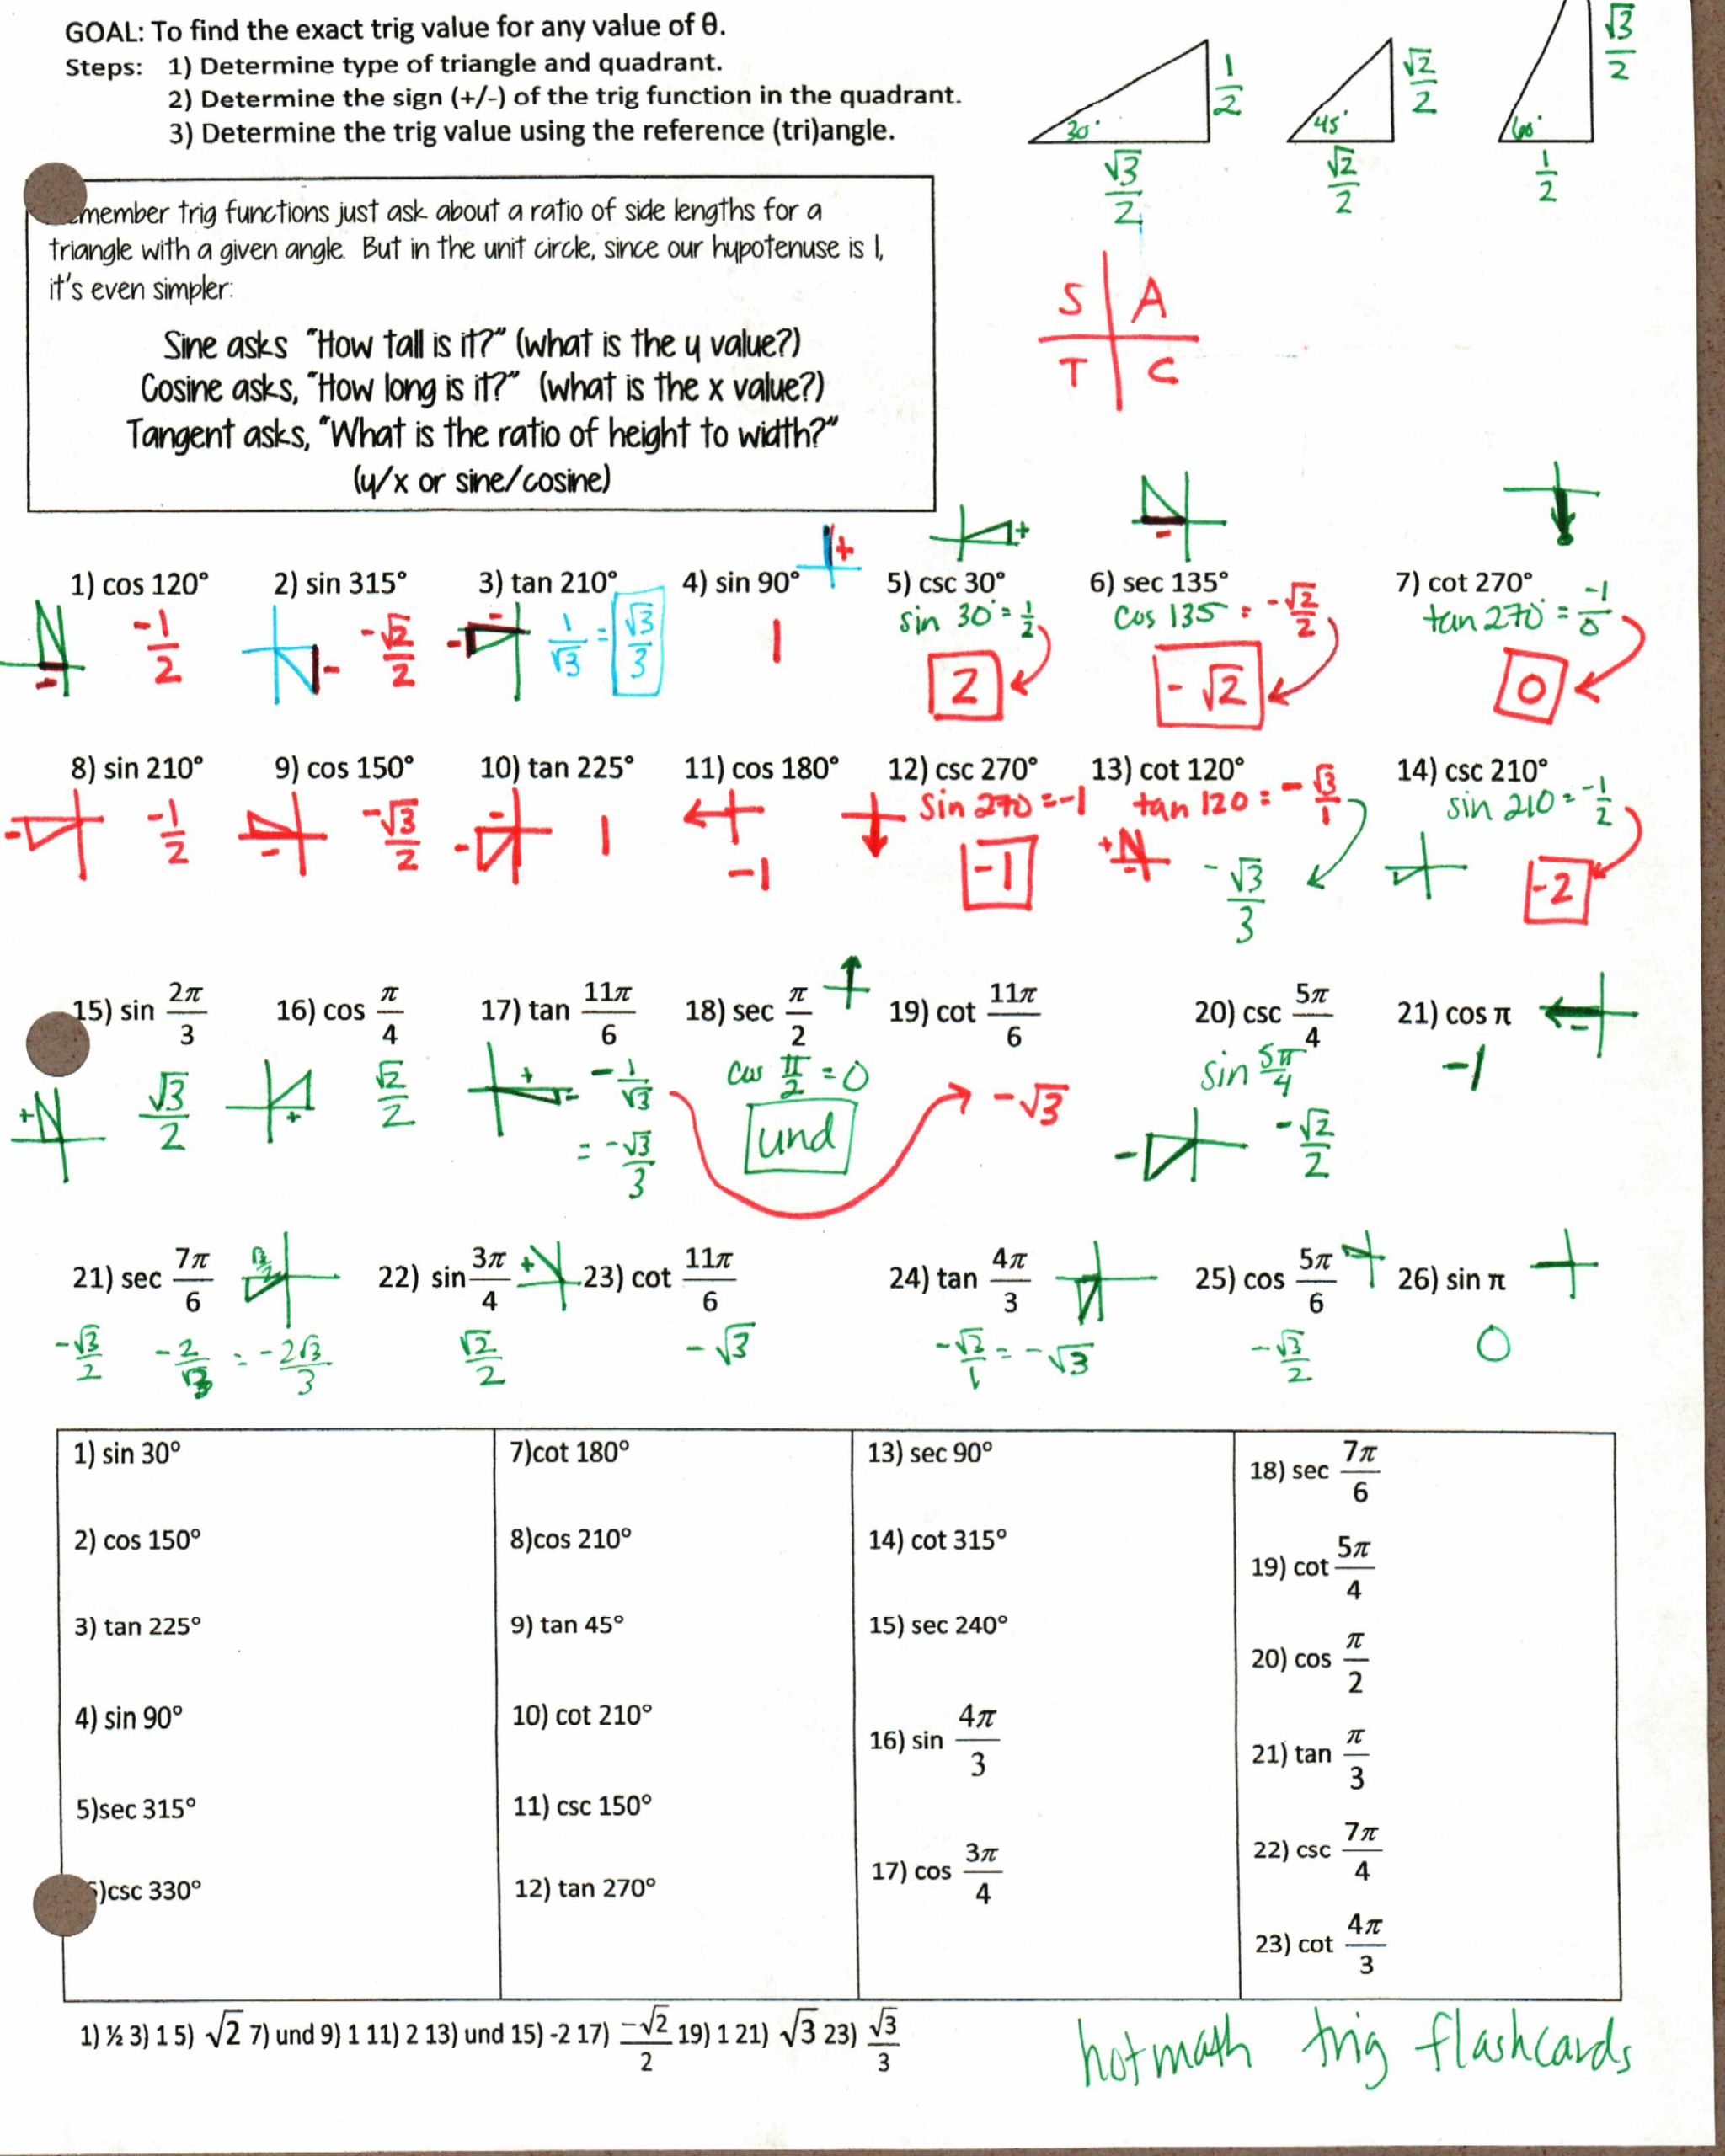 Graphing Inverse Functions Worksheet Precal – Page 3 – Insert Clever Math Pun Here